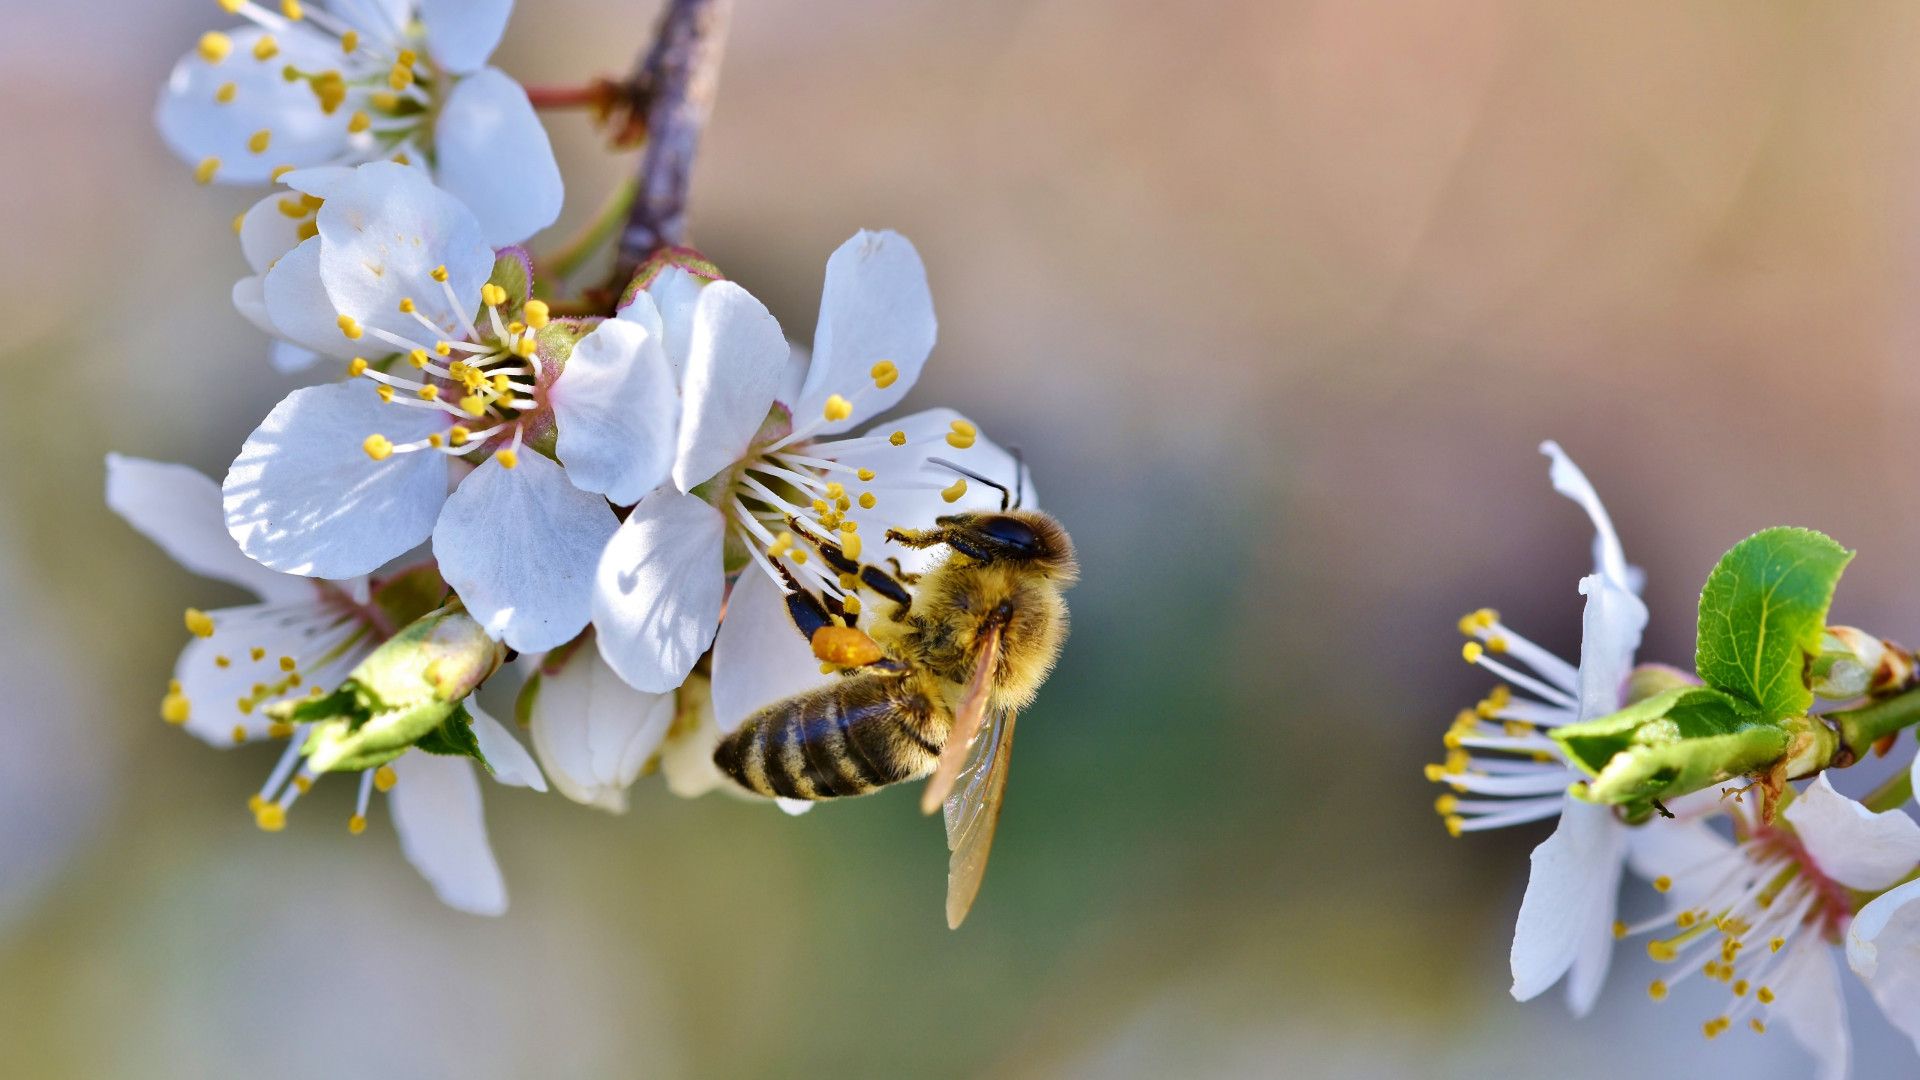 Download wallpaper: Spring, bee, blossoms, flower 1920x1080